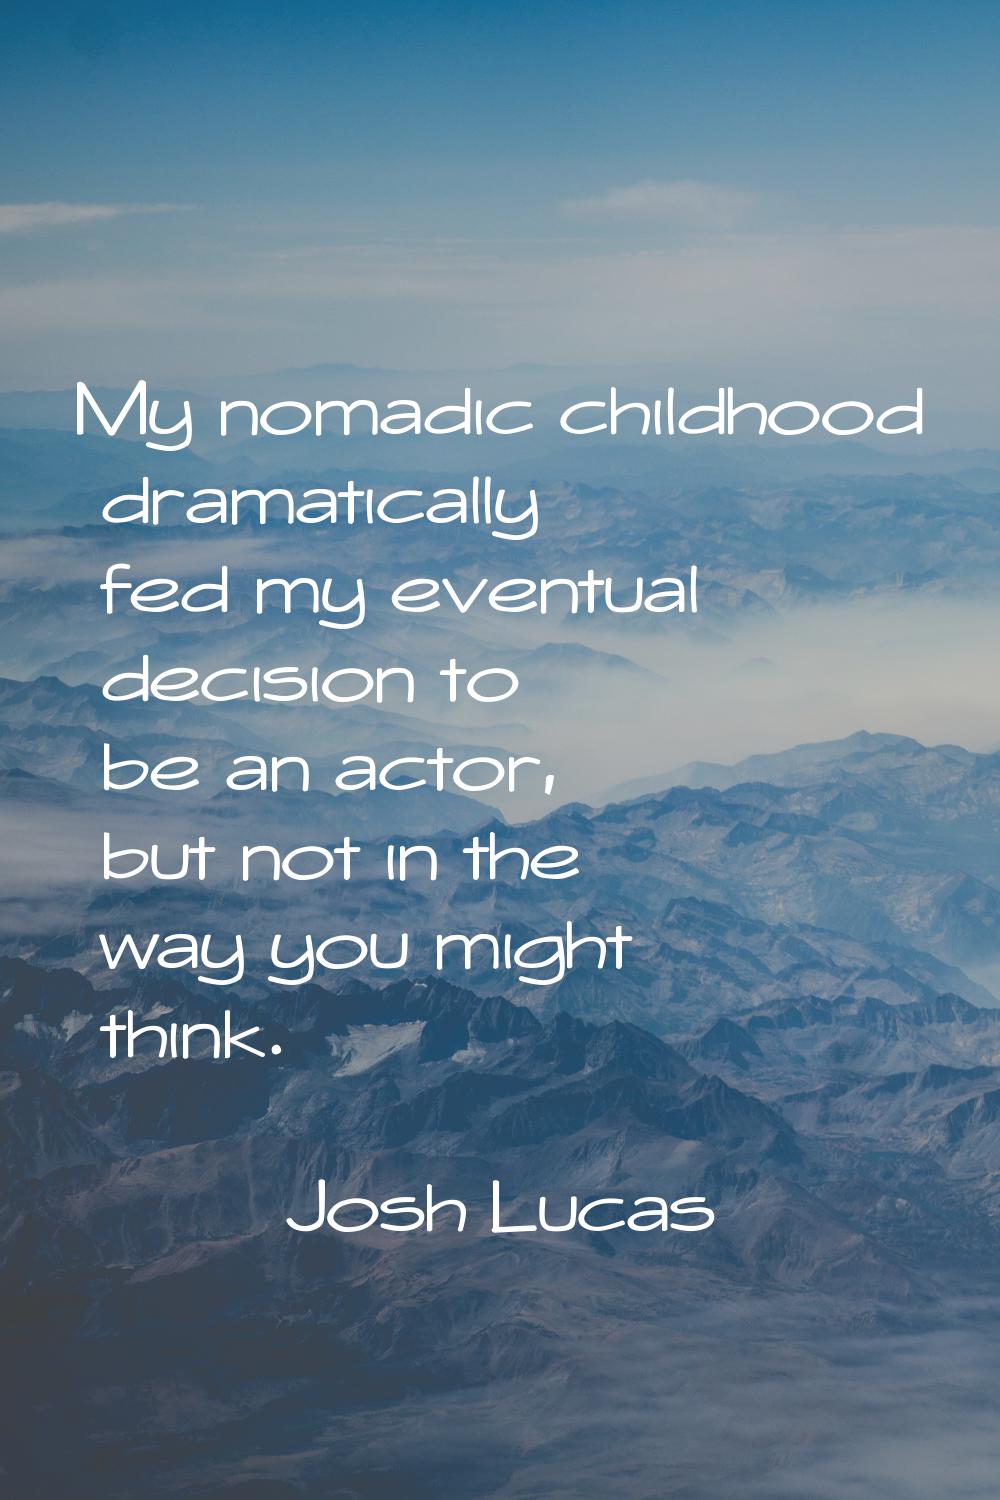 My nomadic childhood dramatically fed my eventual decision to be an actor, but not in the way you m